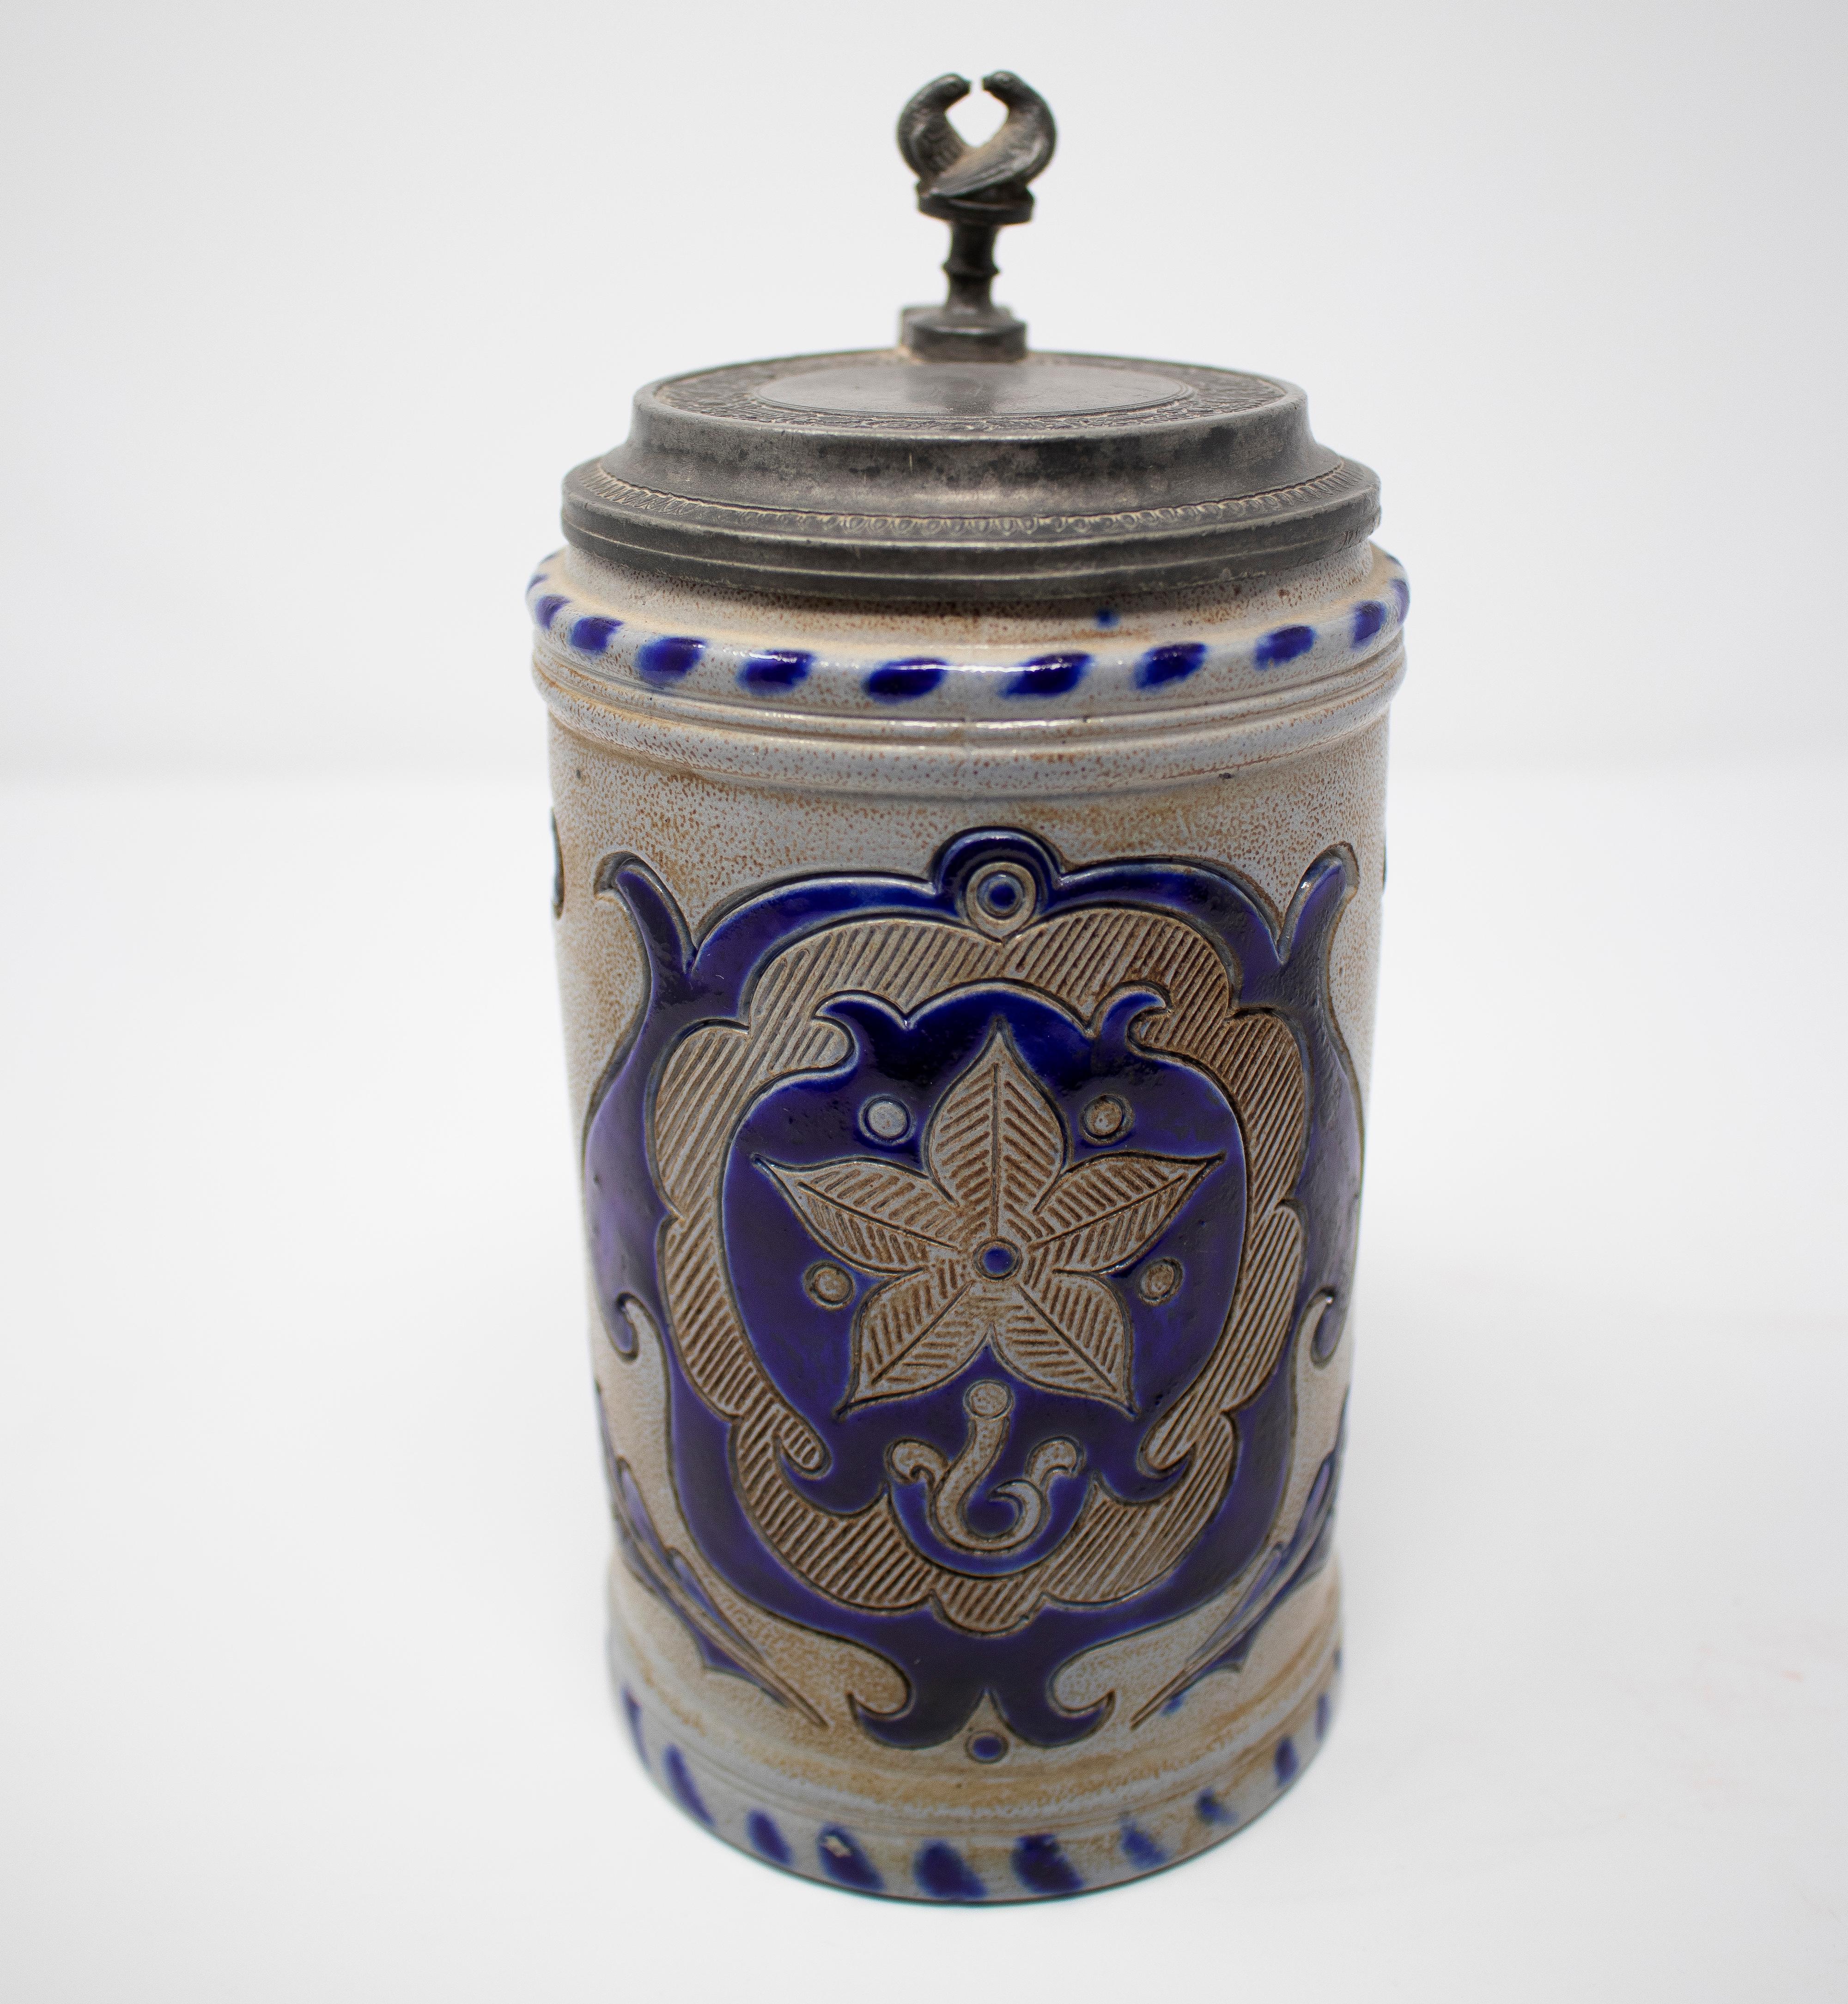 19th century German earthenware beer stein mug with tin lid and cobalt blue ornamental decoration.
  